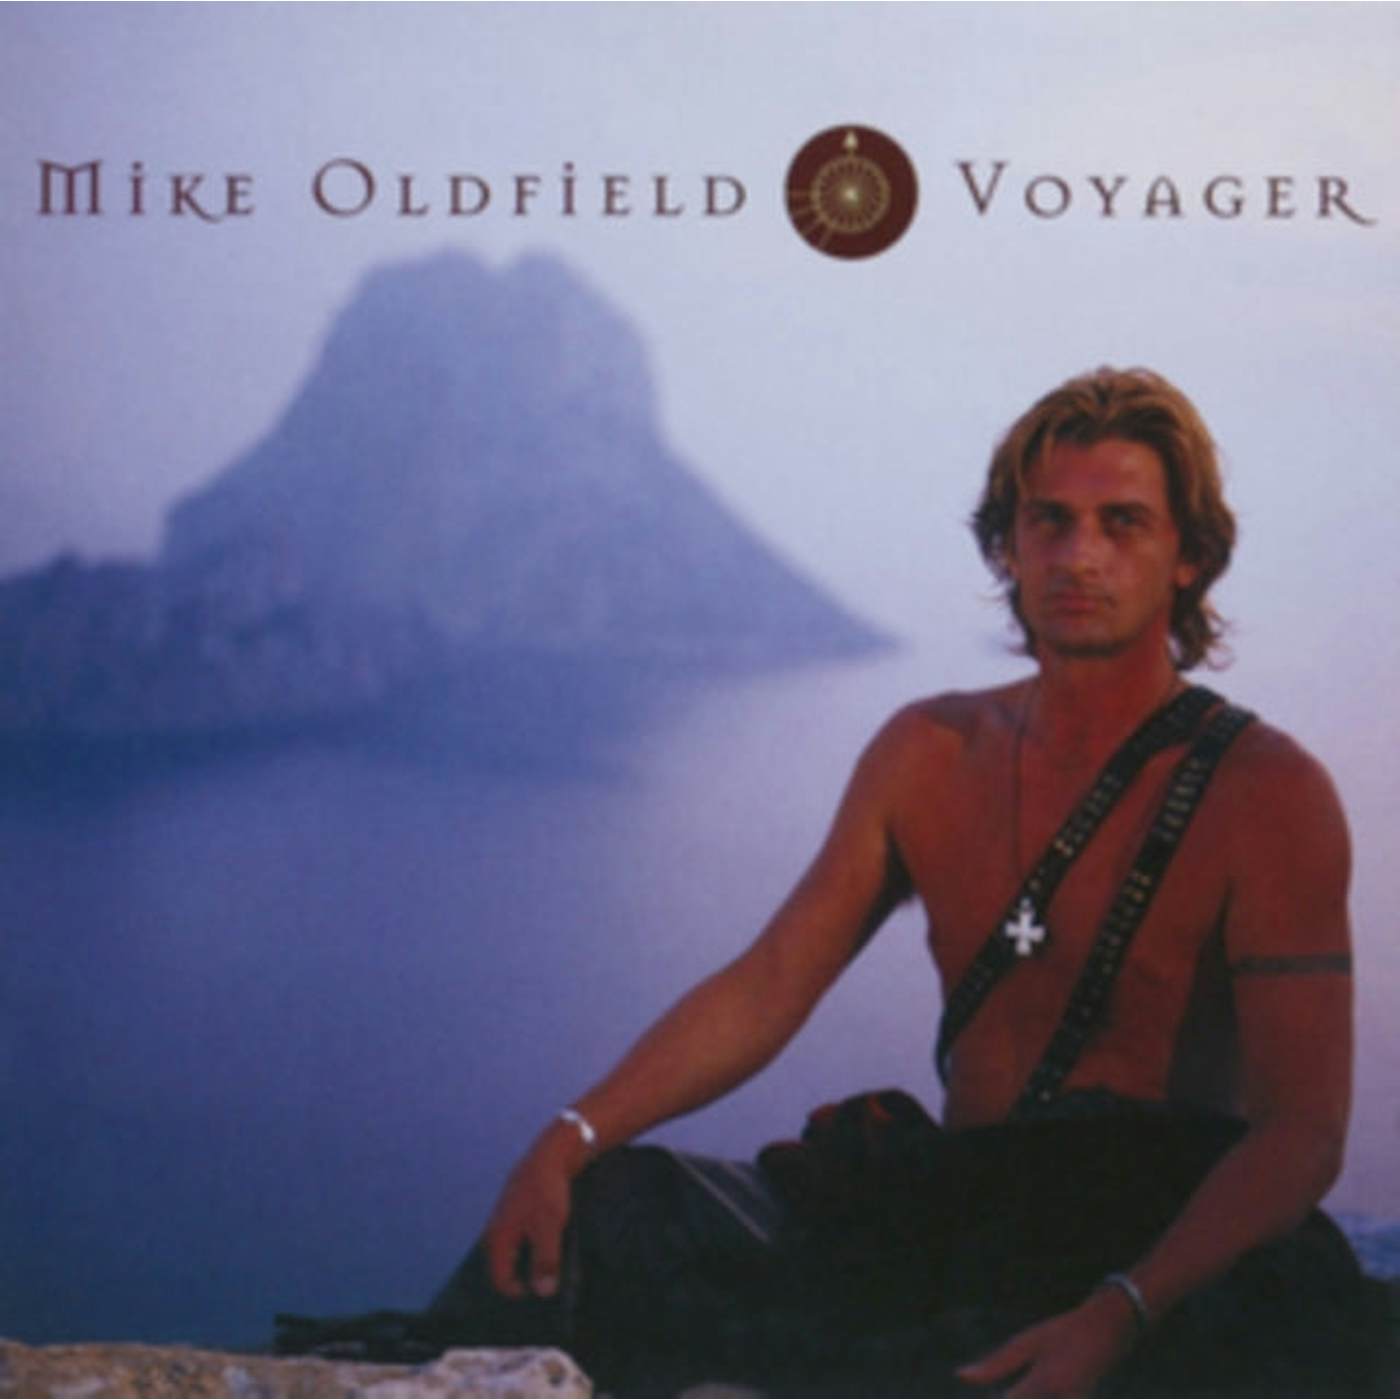 Mike Oldfield LP - The Voyager (Vinyl)